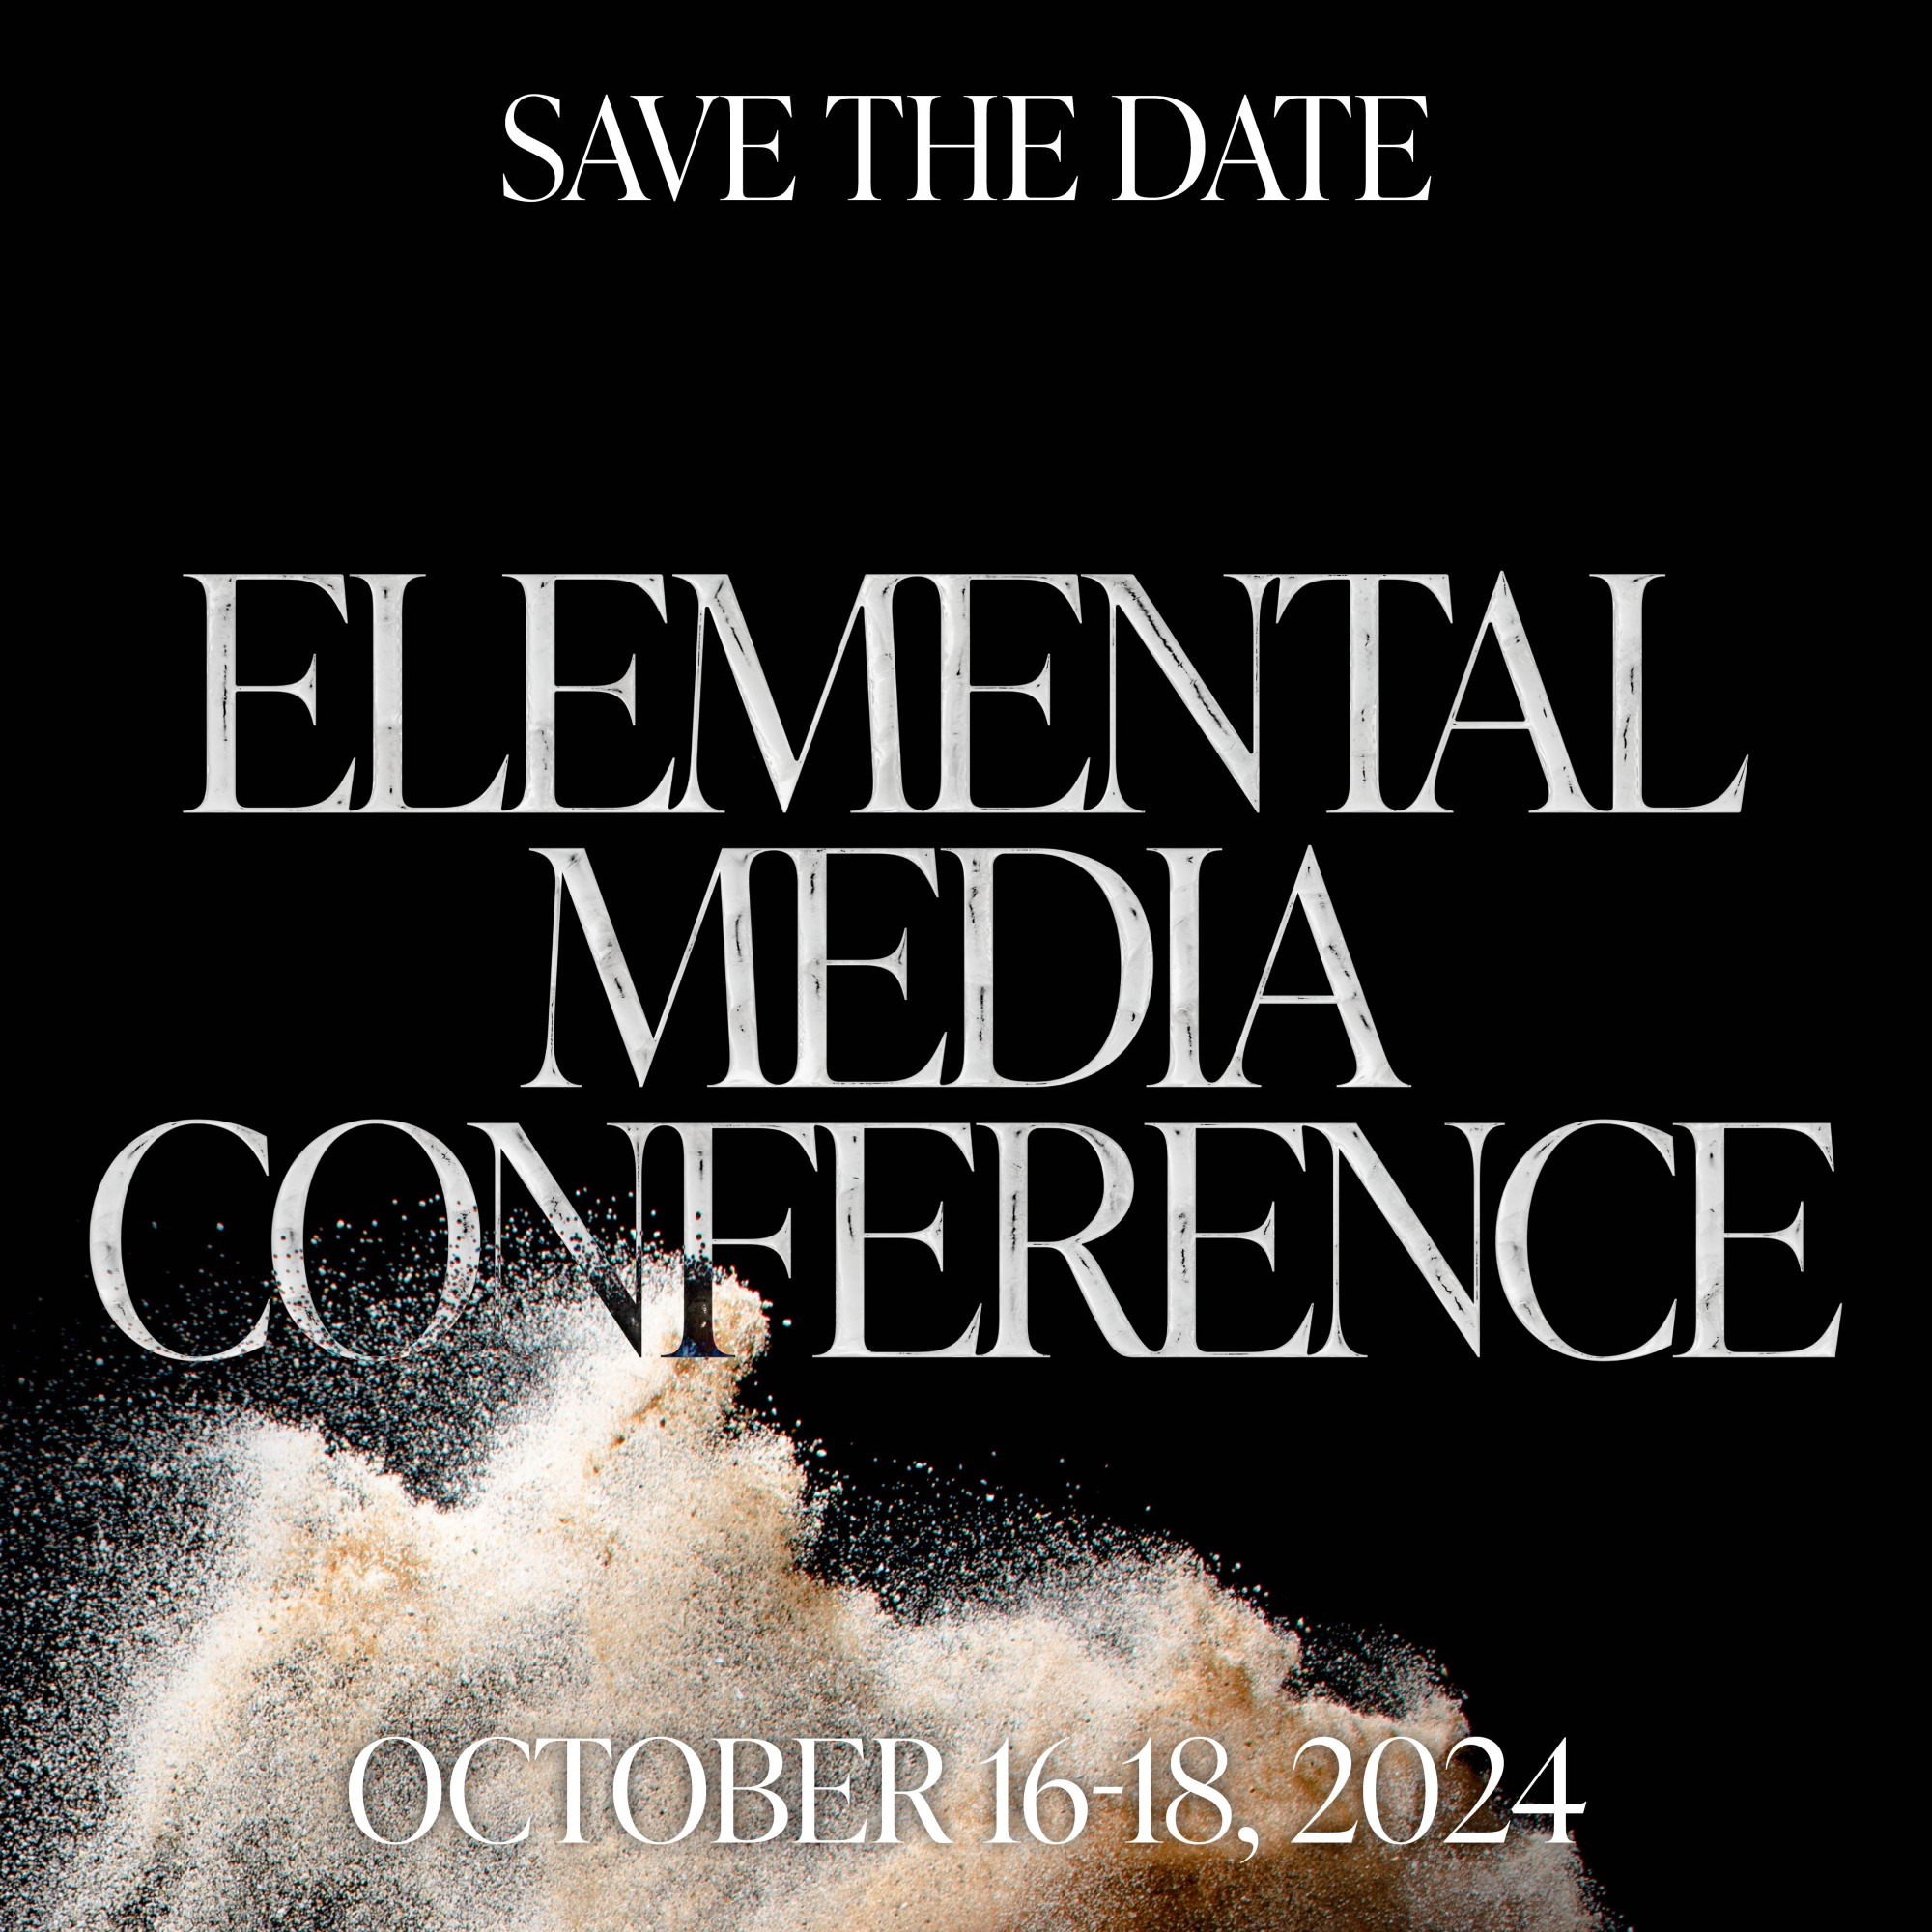 Close up of sand against black background with text "Elemental Media Conference."